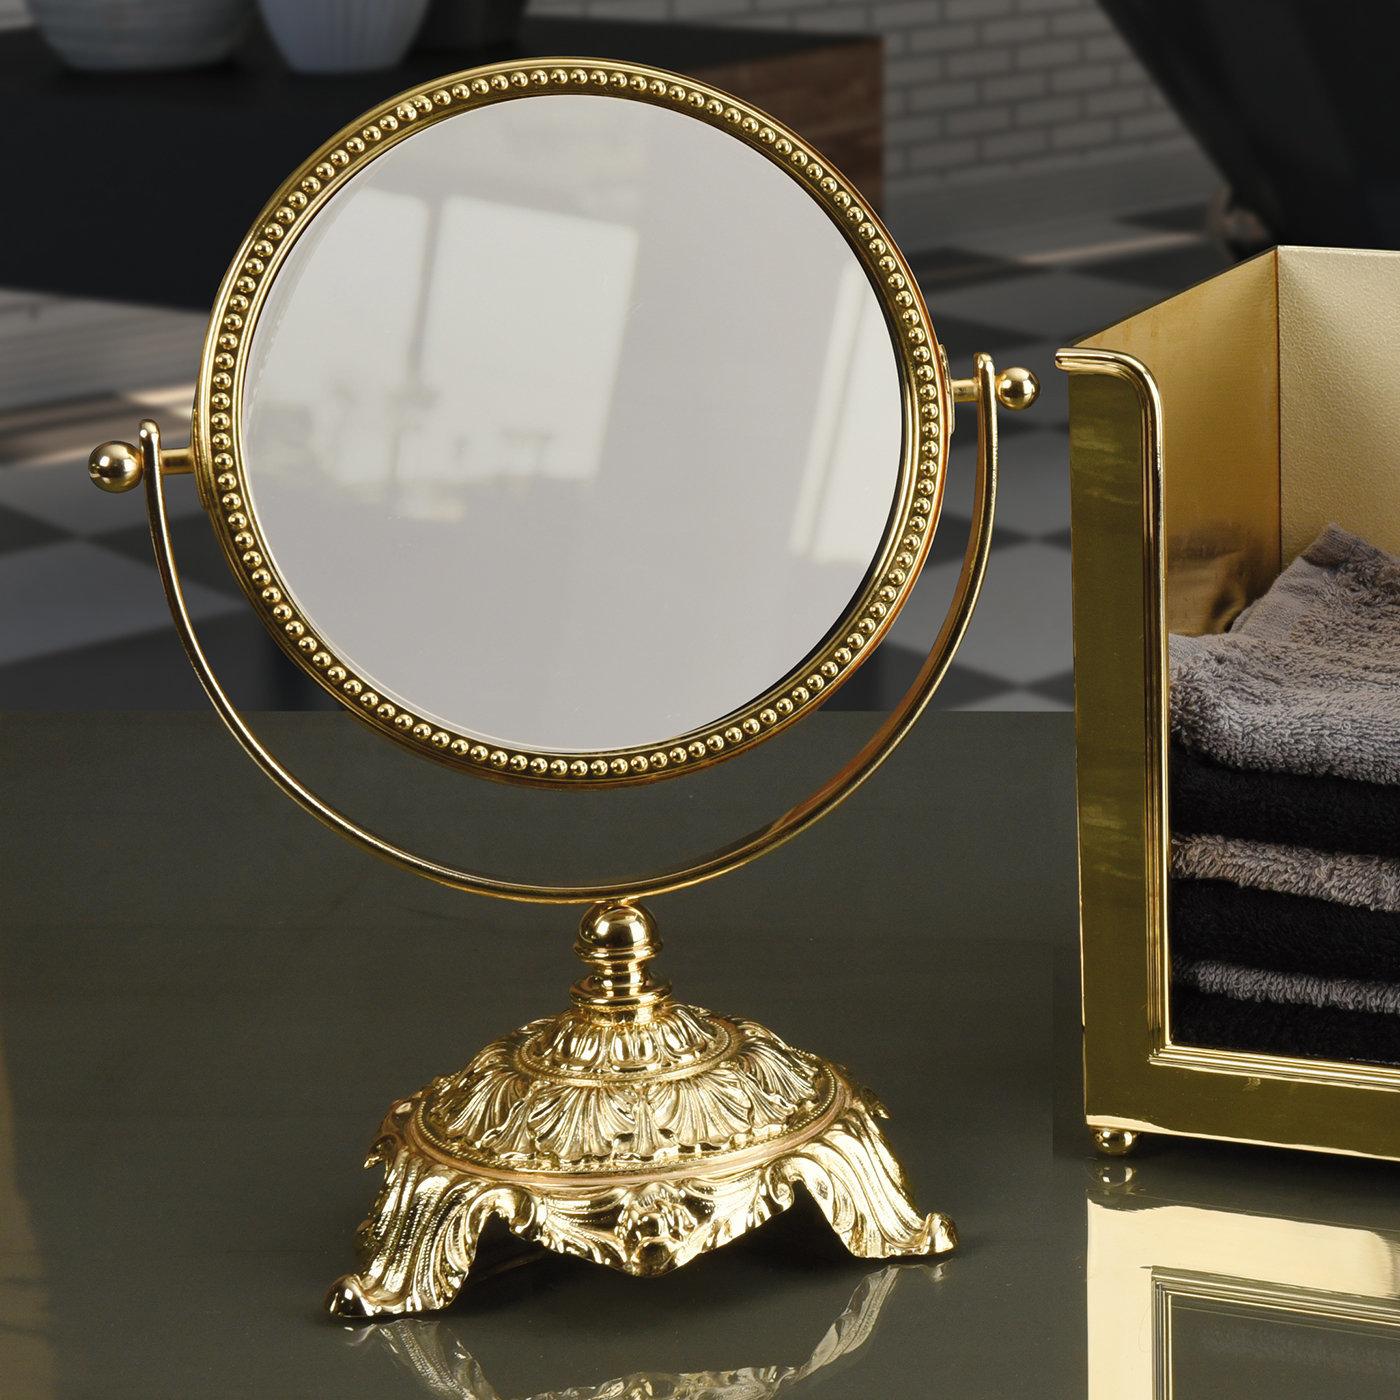 Aesthetic refinement and traditional craftsmanship merge in this lavish mirror, a superb complement to an opulent vanity table. Handcrafted of brass and finished with 24k galvanized gold, it features a classic round shape mounted on an upward